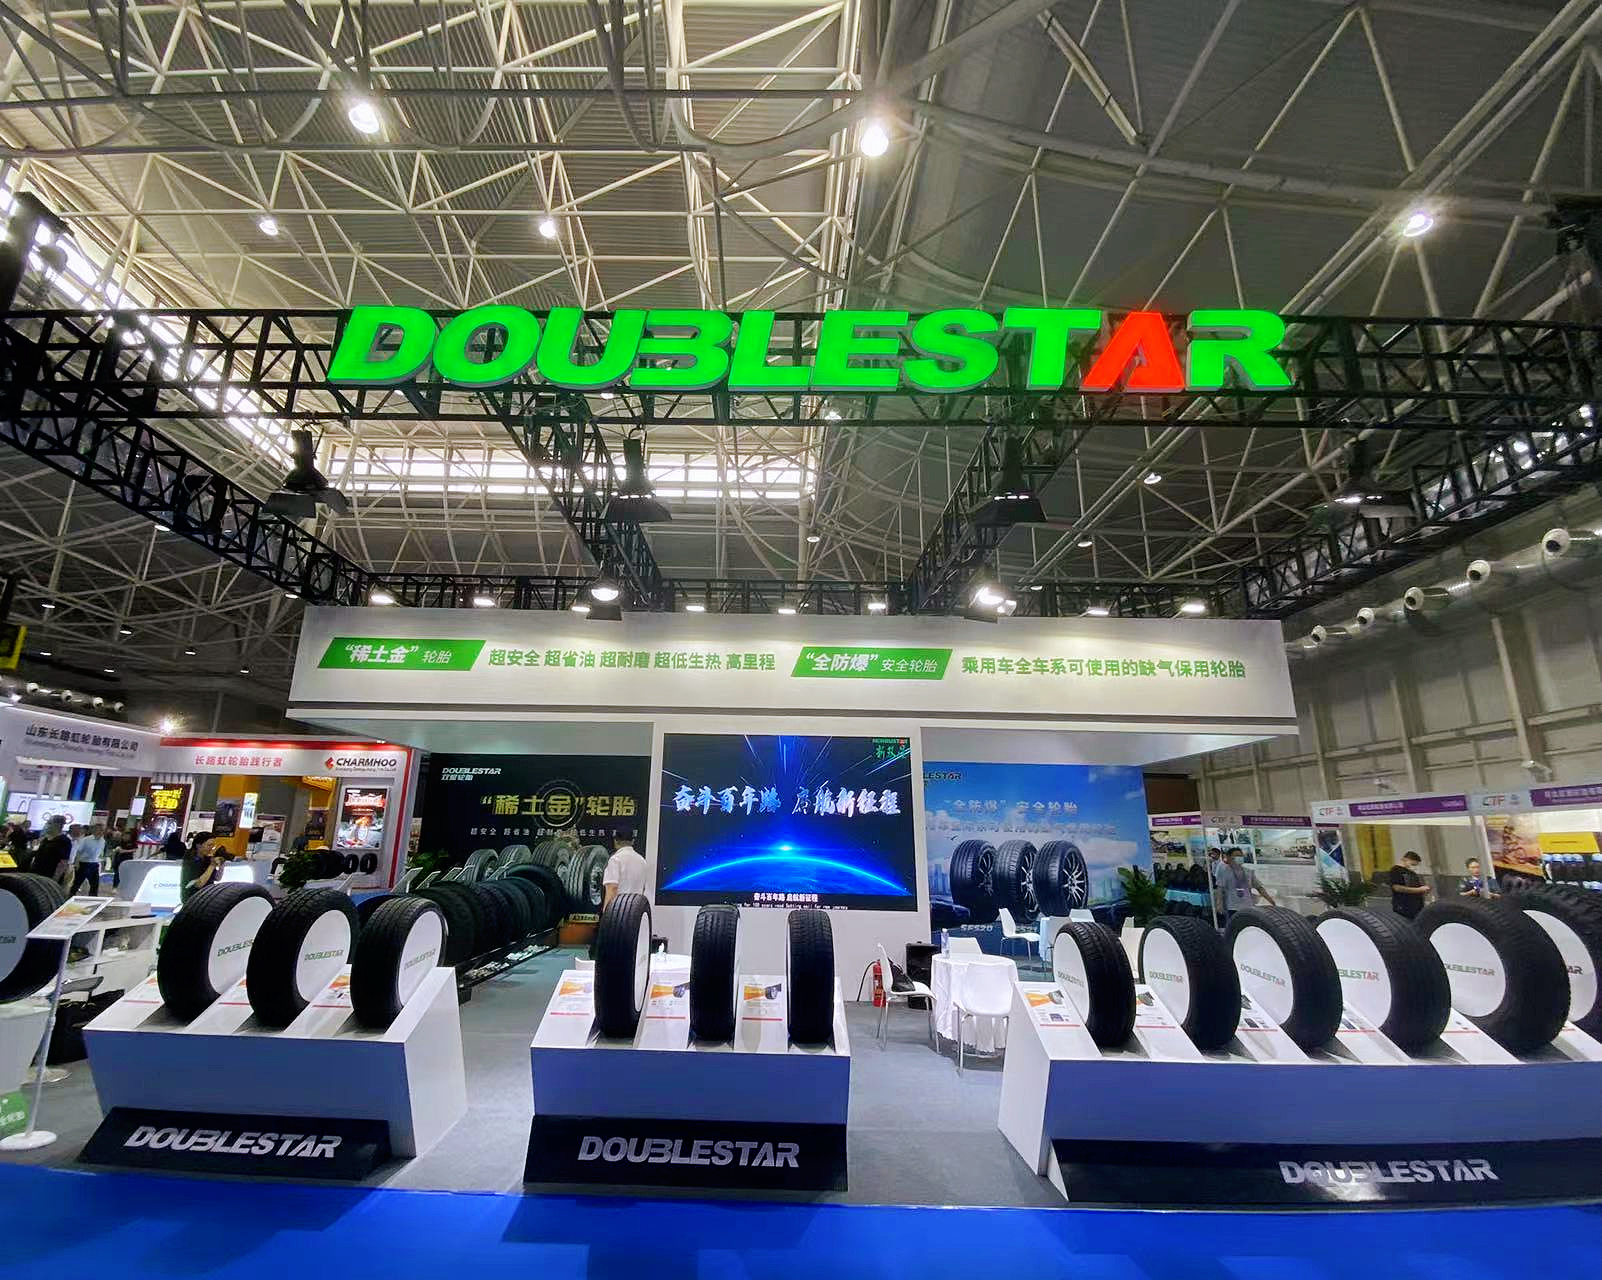 Doublestar Tire Attended the 19th Asia Pacific International Plastic and Rubber Industry Exhibition